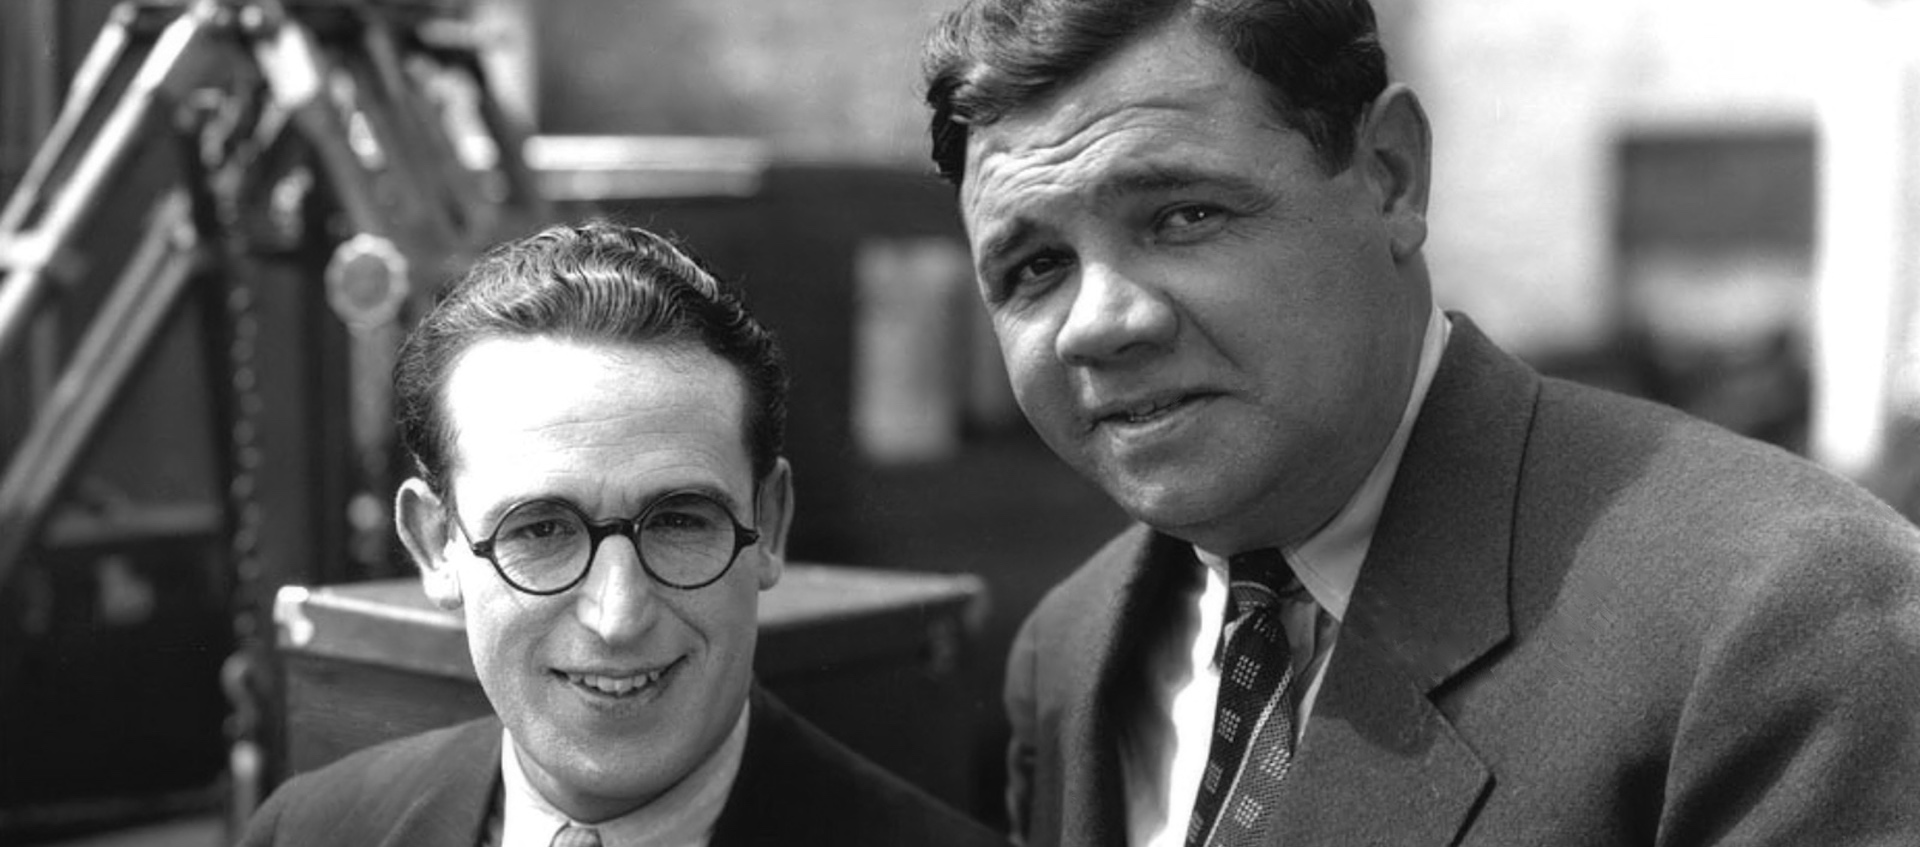 Vintage black and white photo of silent film comedian Harold Lloyd and baseball legend Babe Ruth